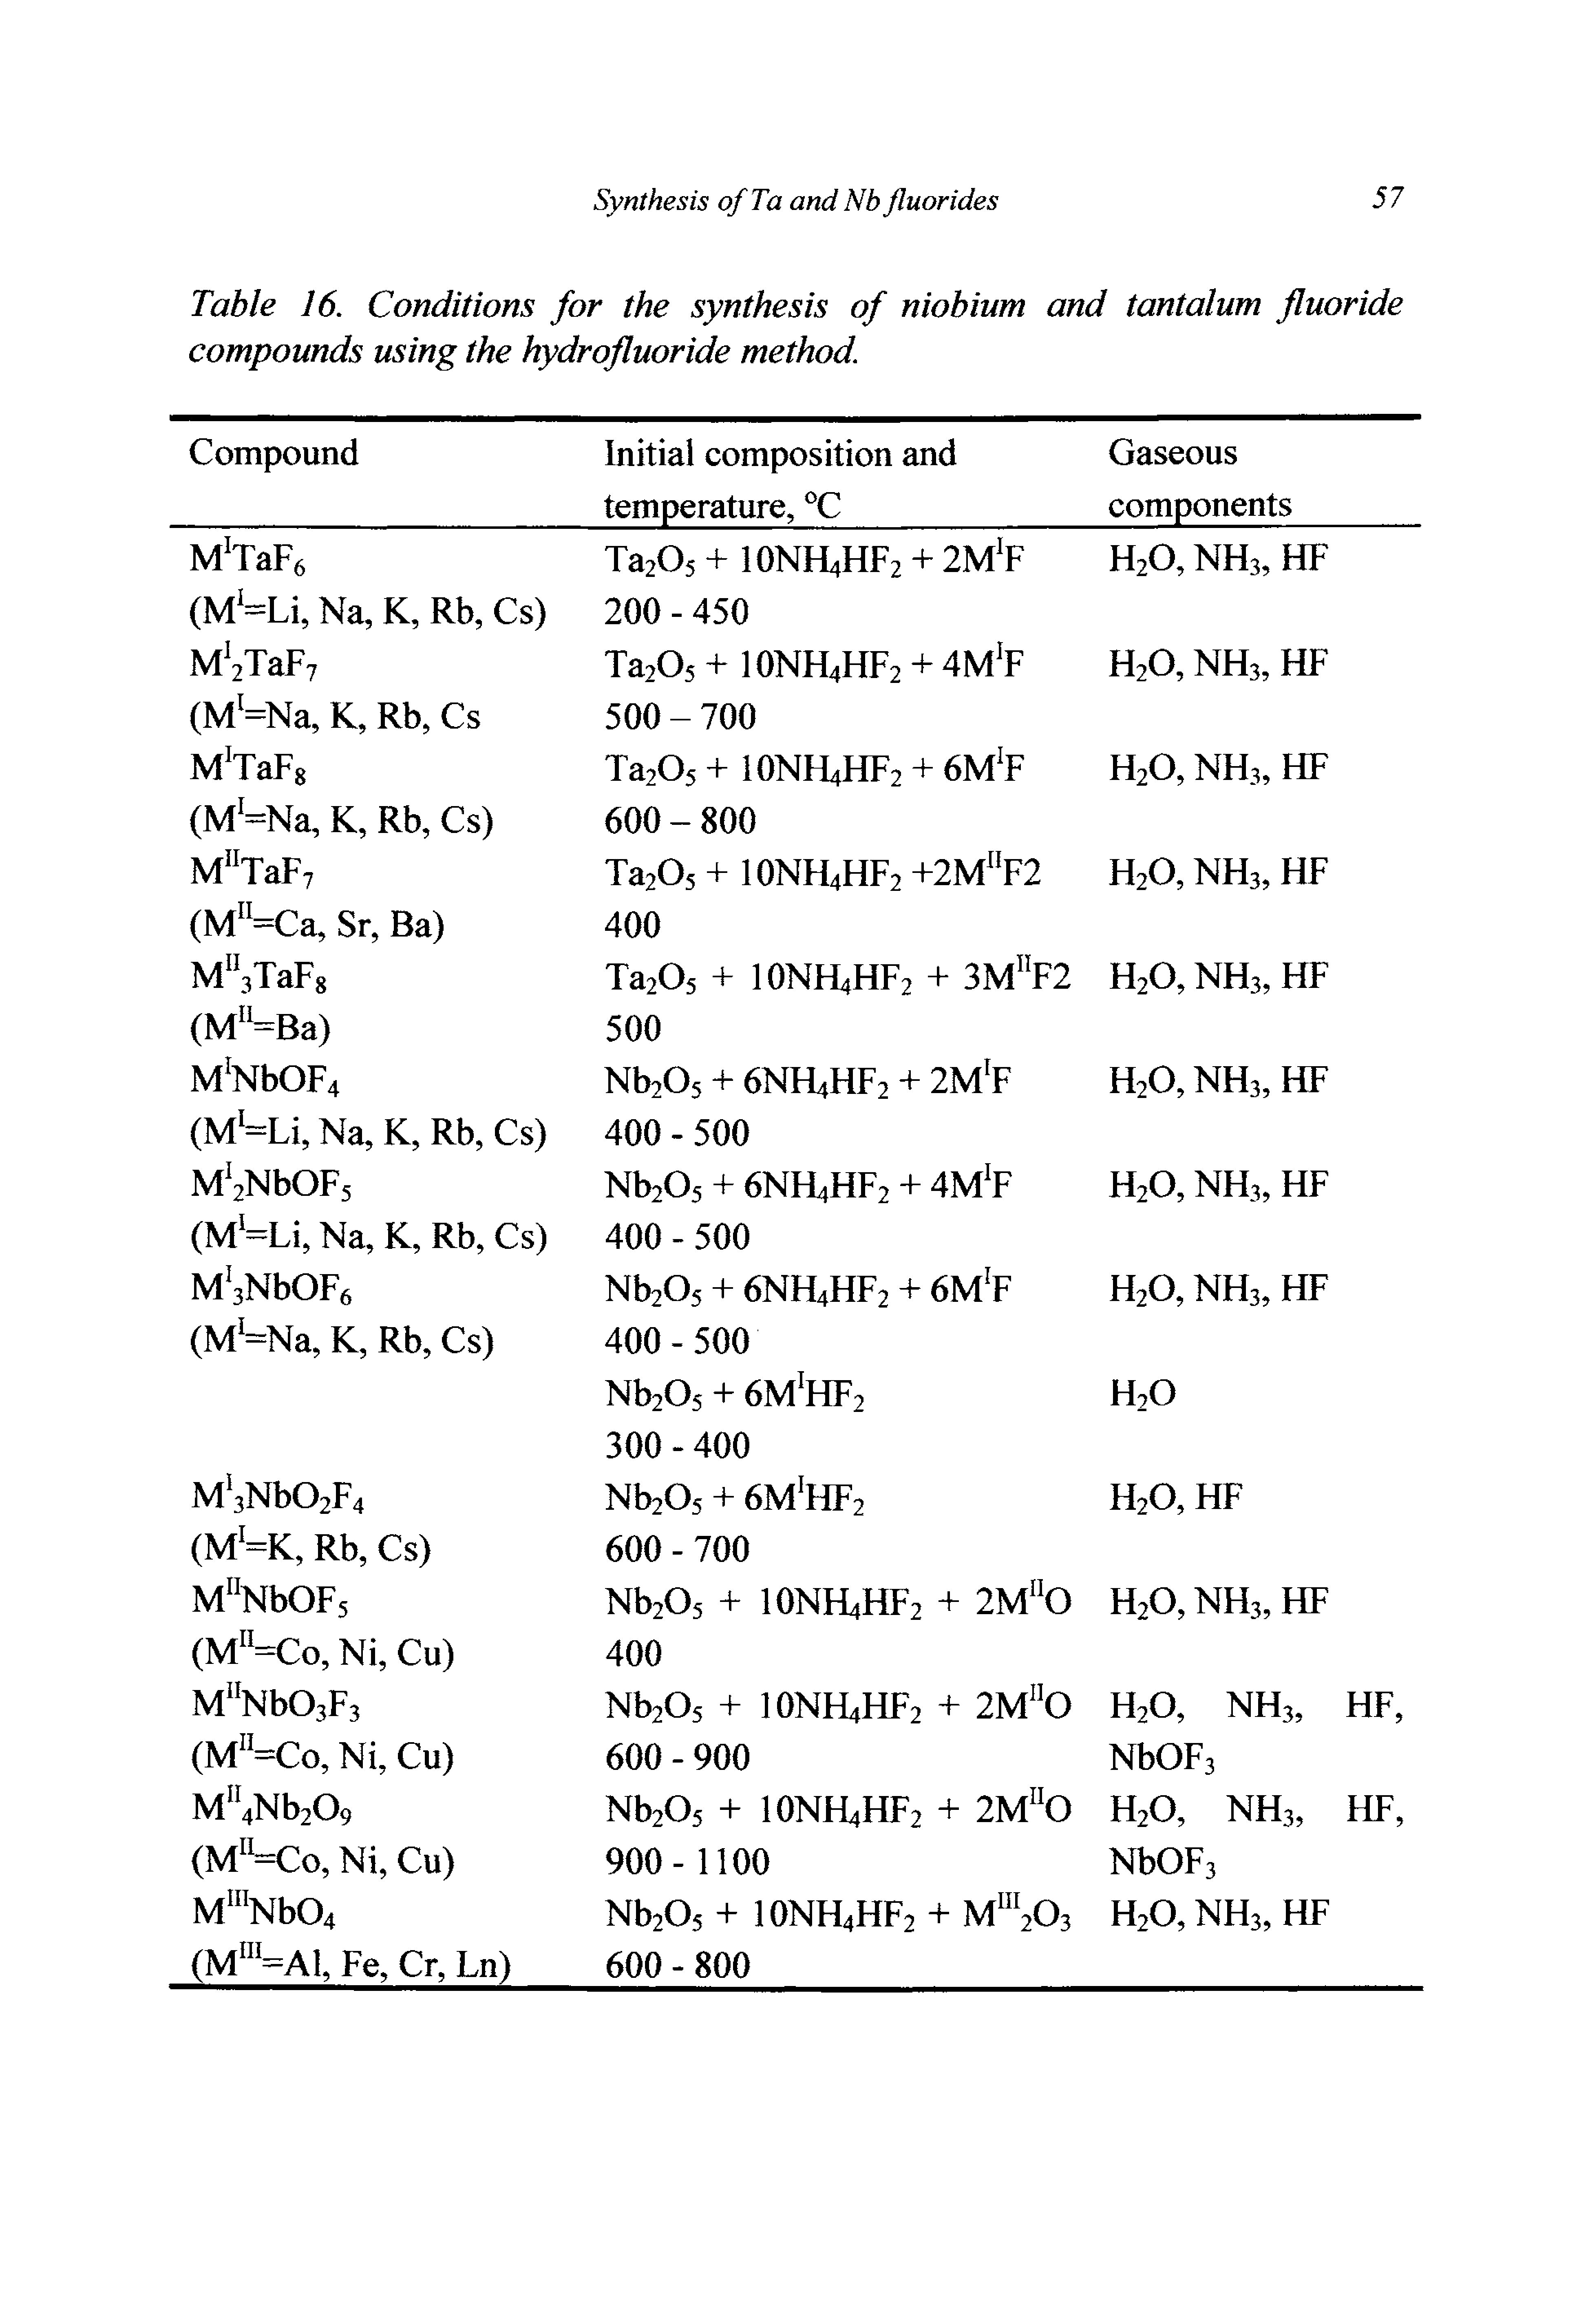 Table 16. Conditions for the synthesis of niobium and tantalum fluoride compounds using the hydrofluoride method.